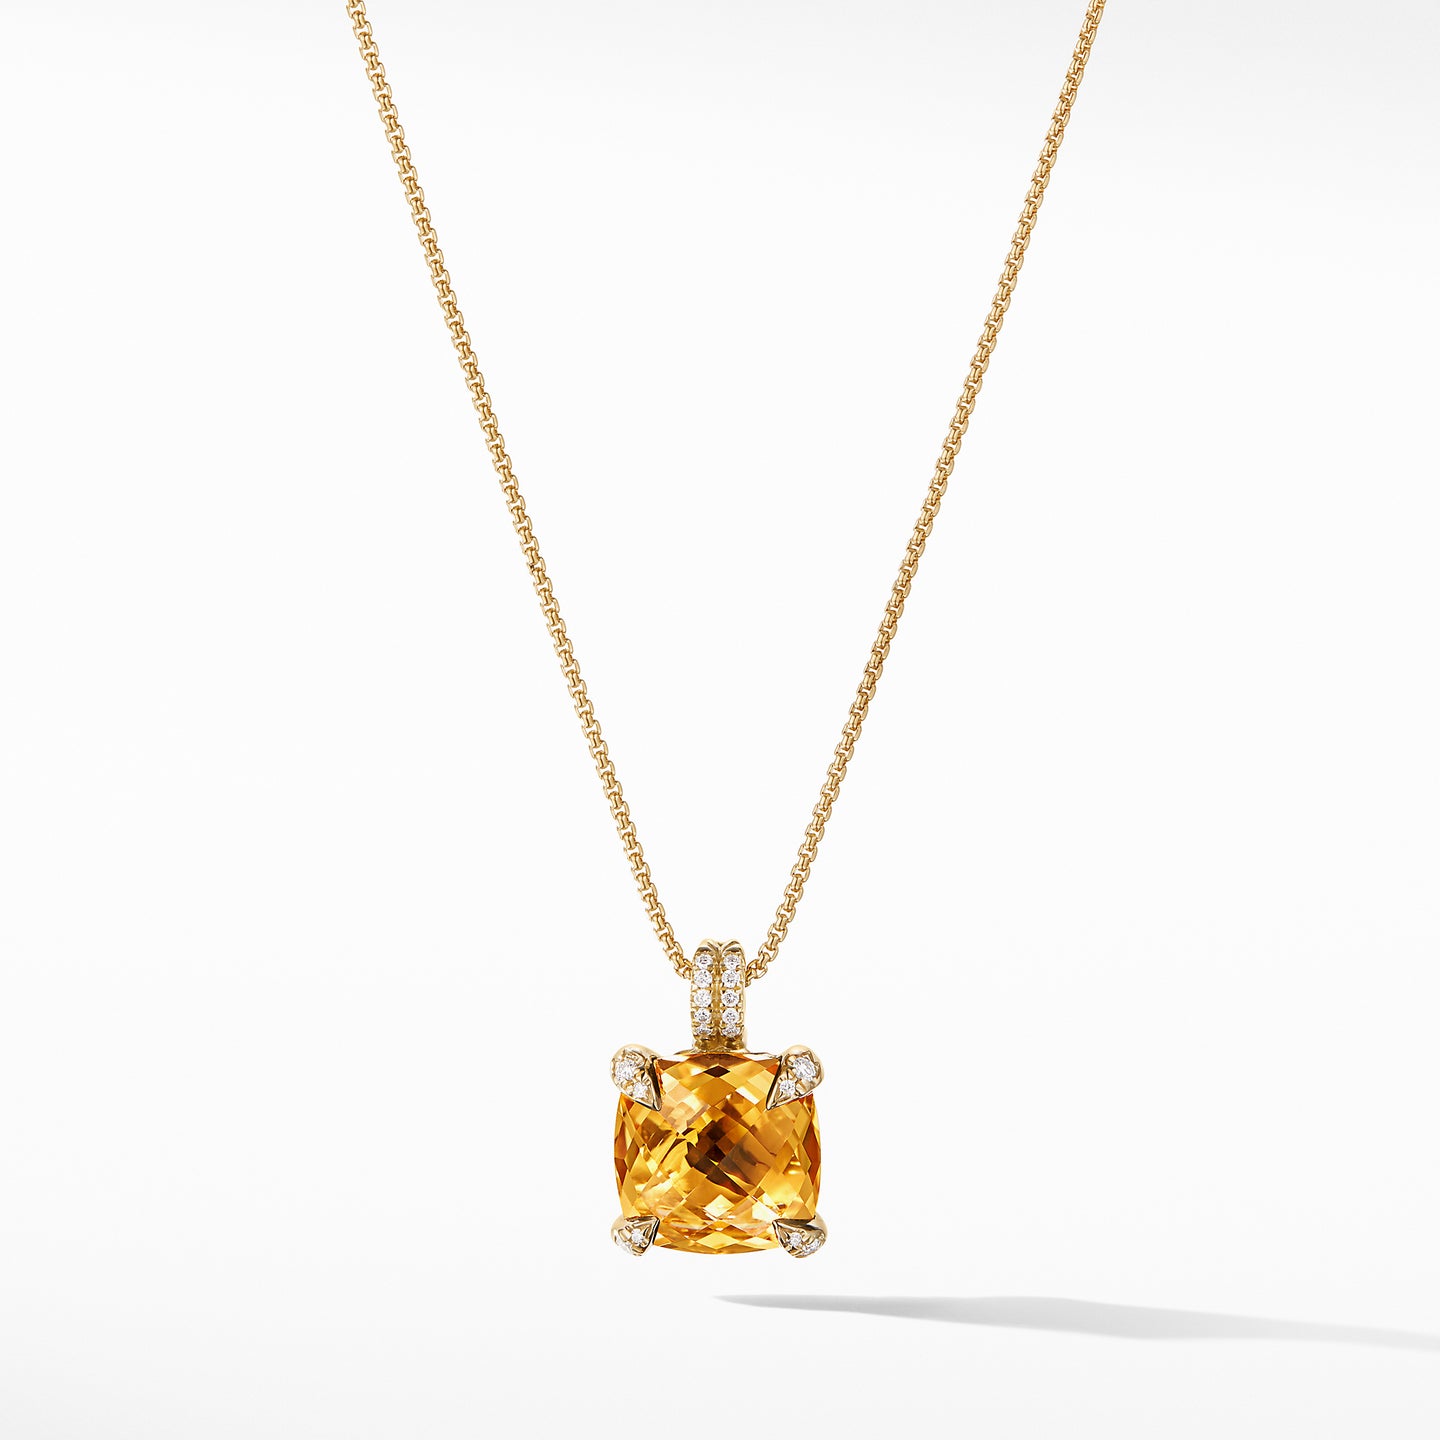 Pendant Necklace with Citrine and Diamonds in 18K Gold, 18